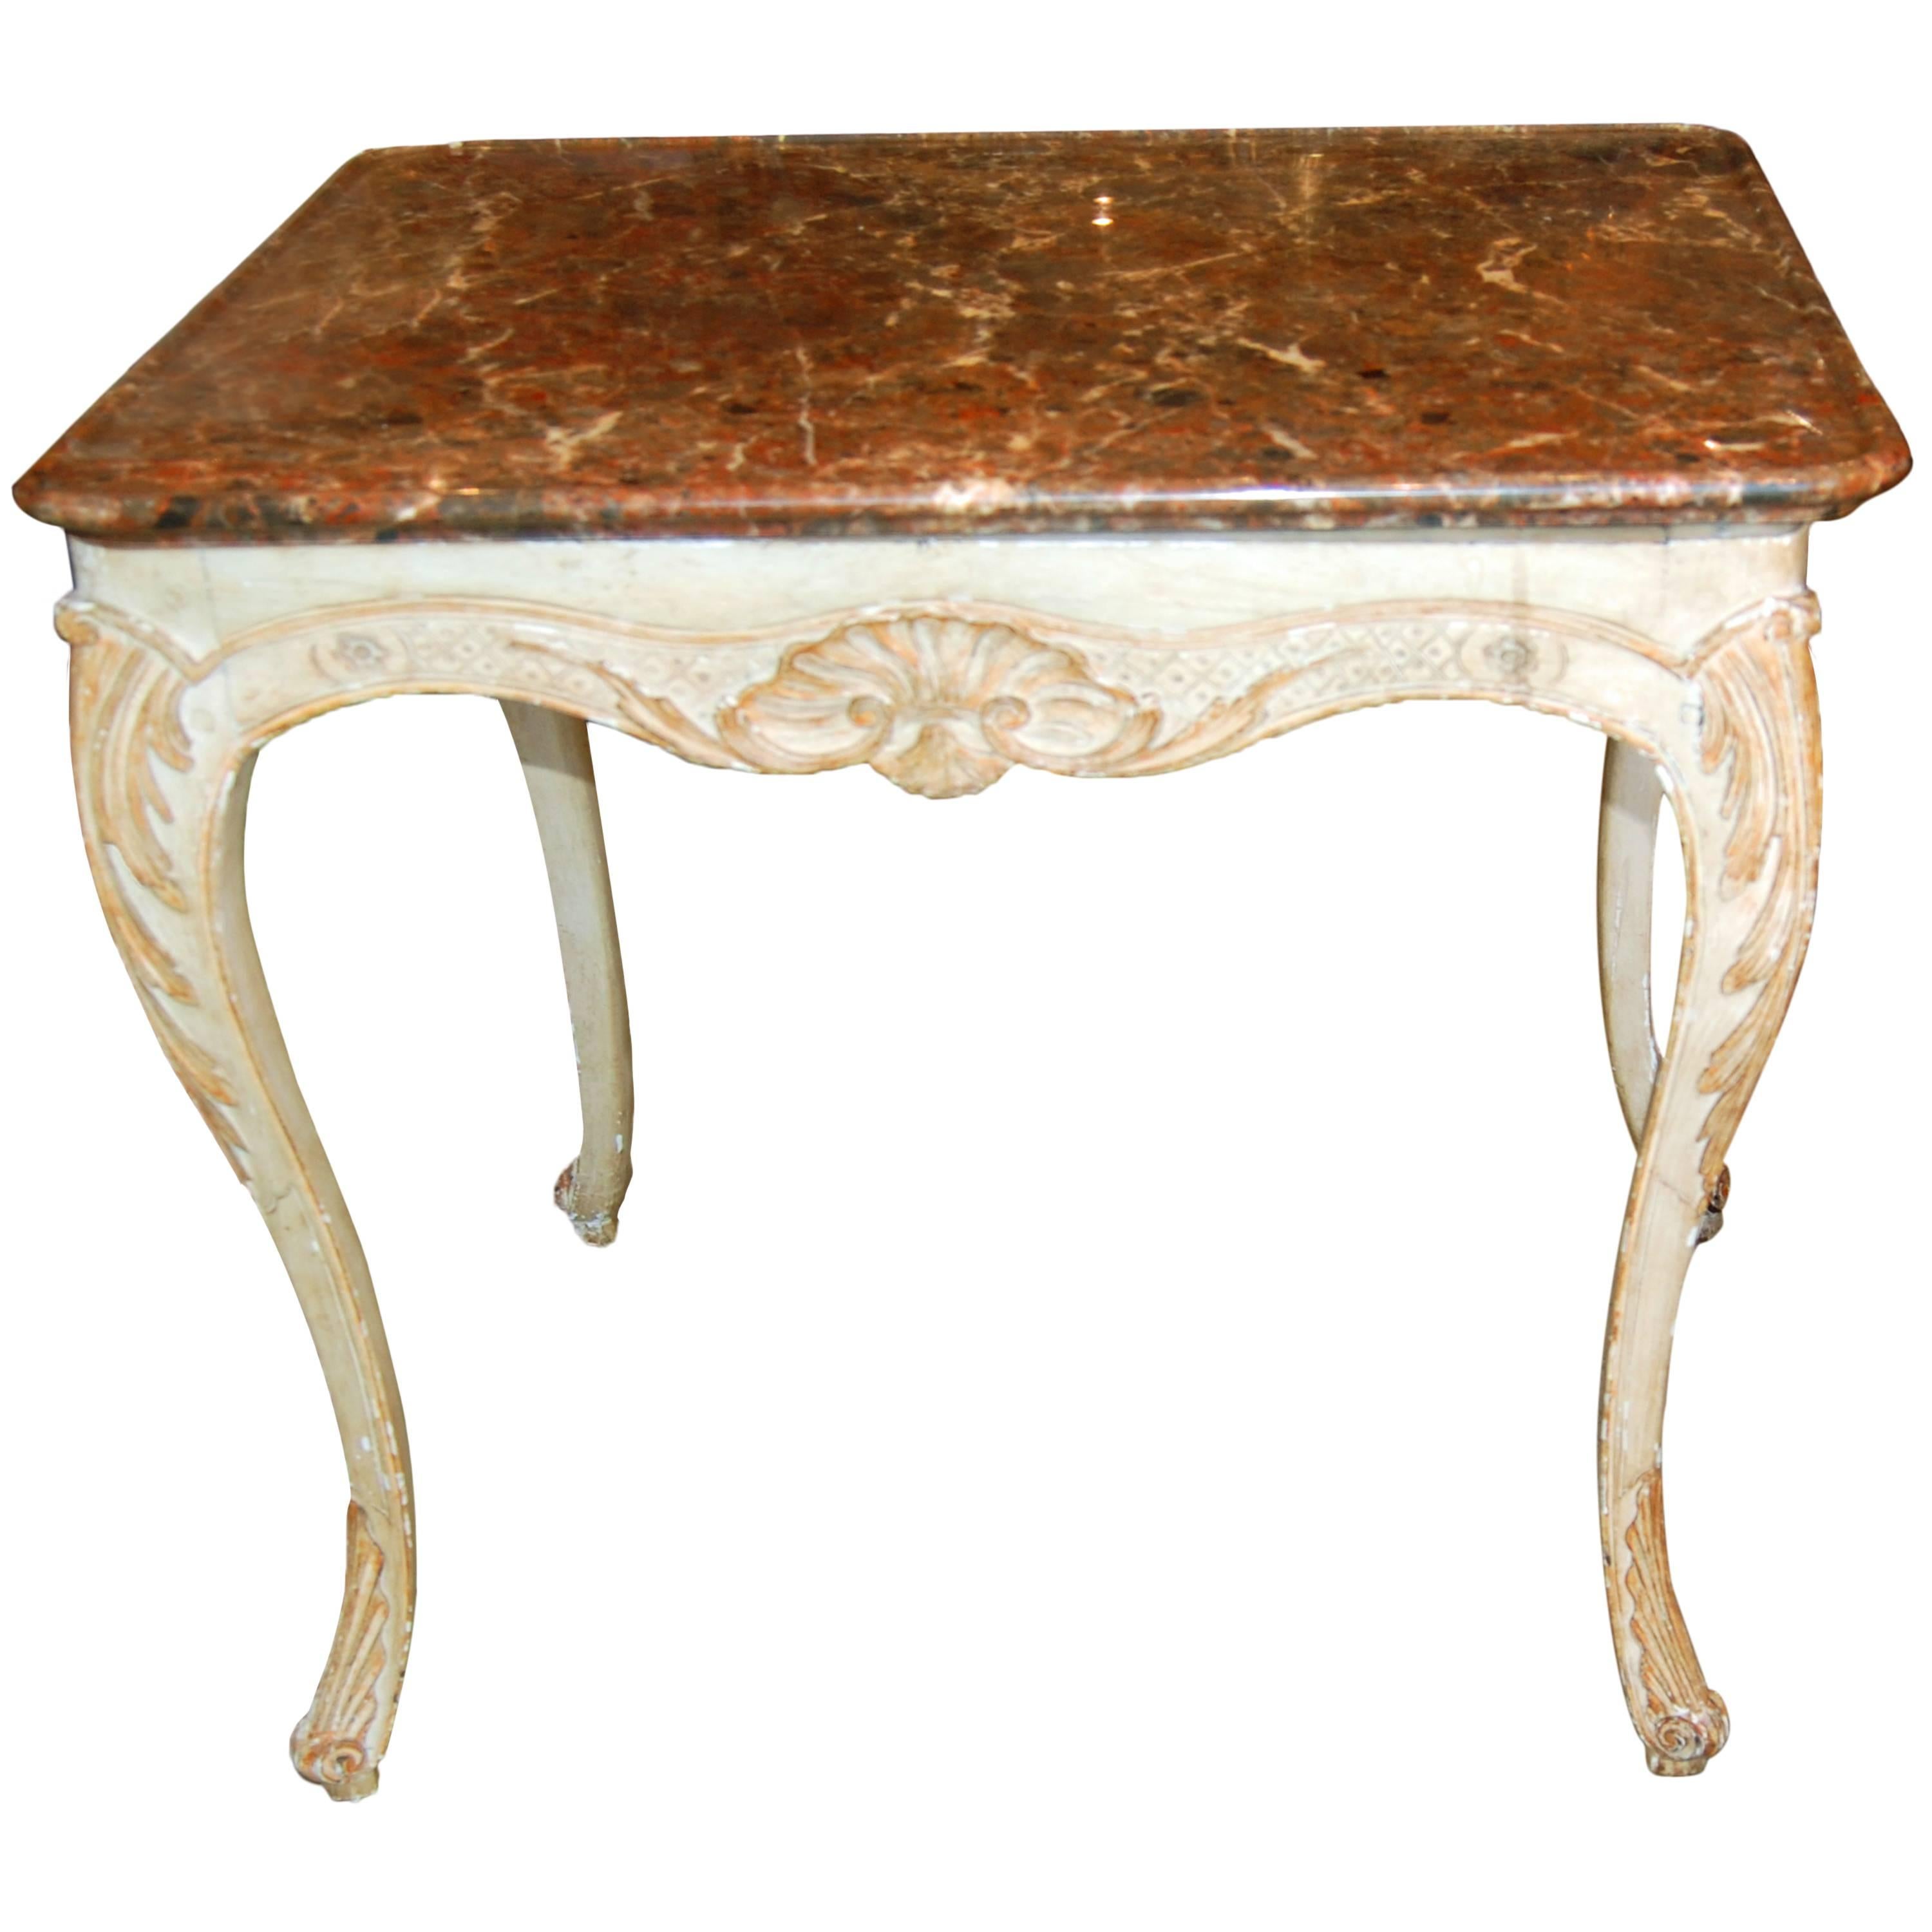 19th Century Carved and Painted Table